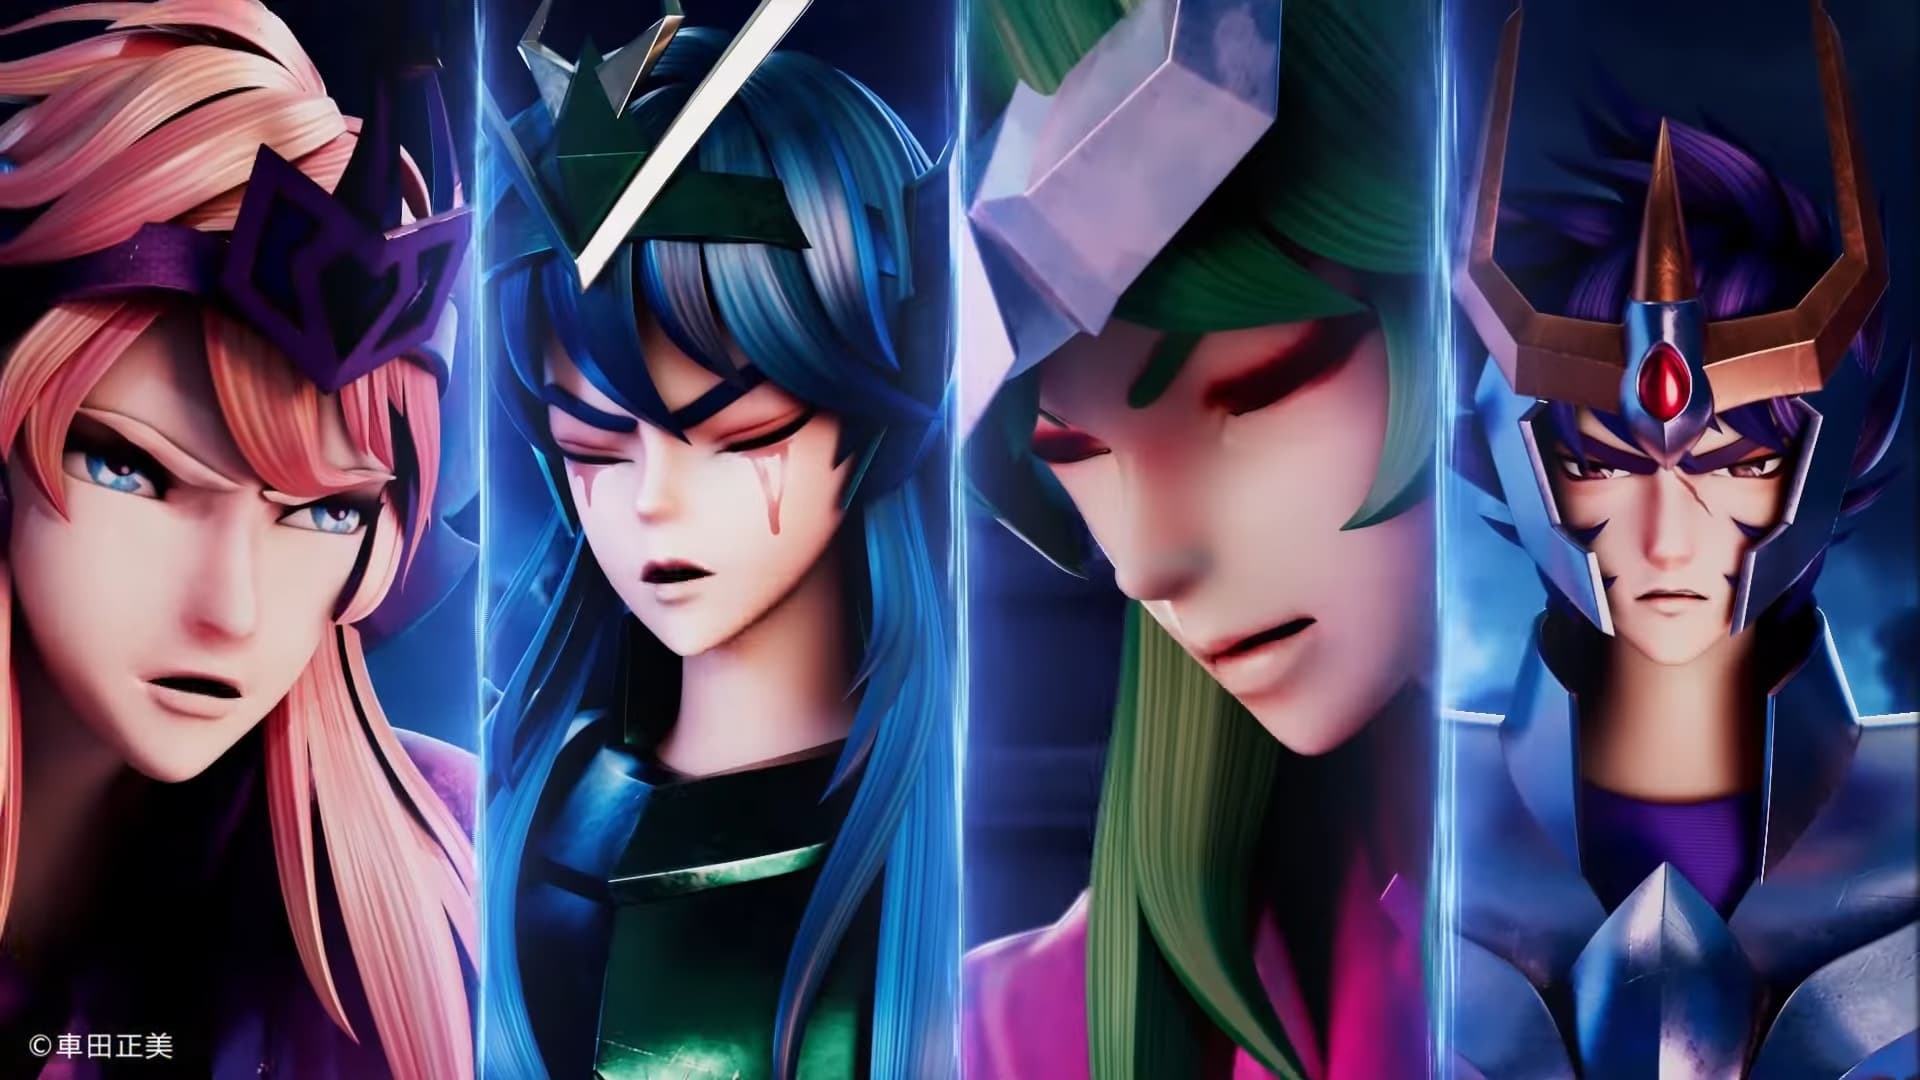 Saint Seiya: Legend of Justice characters